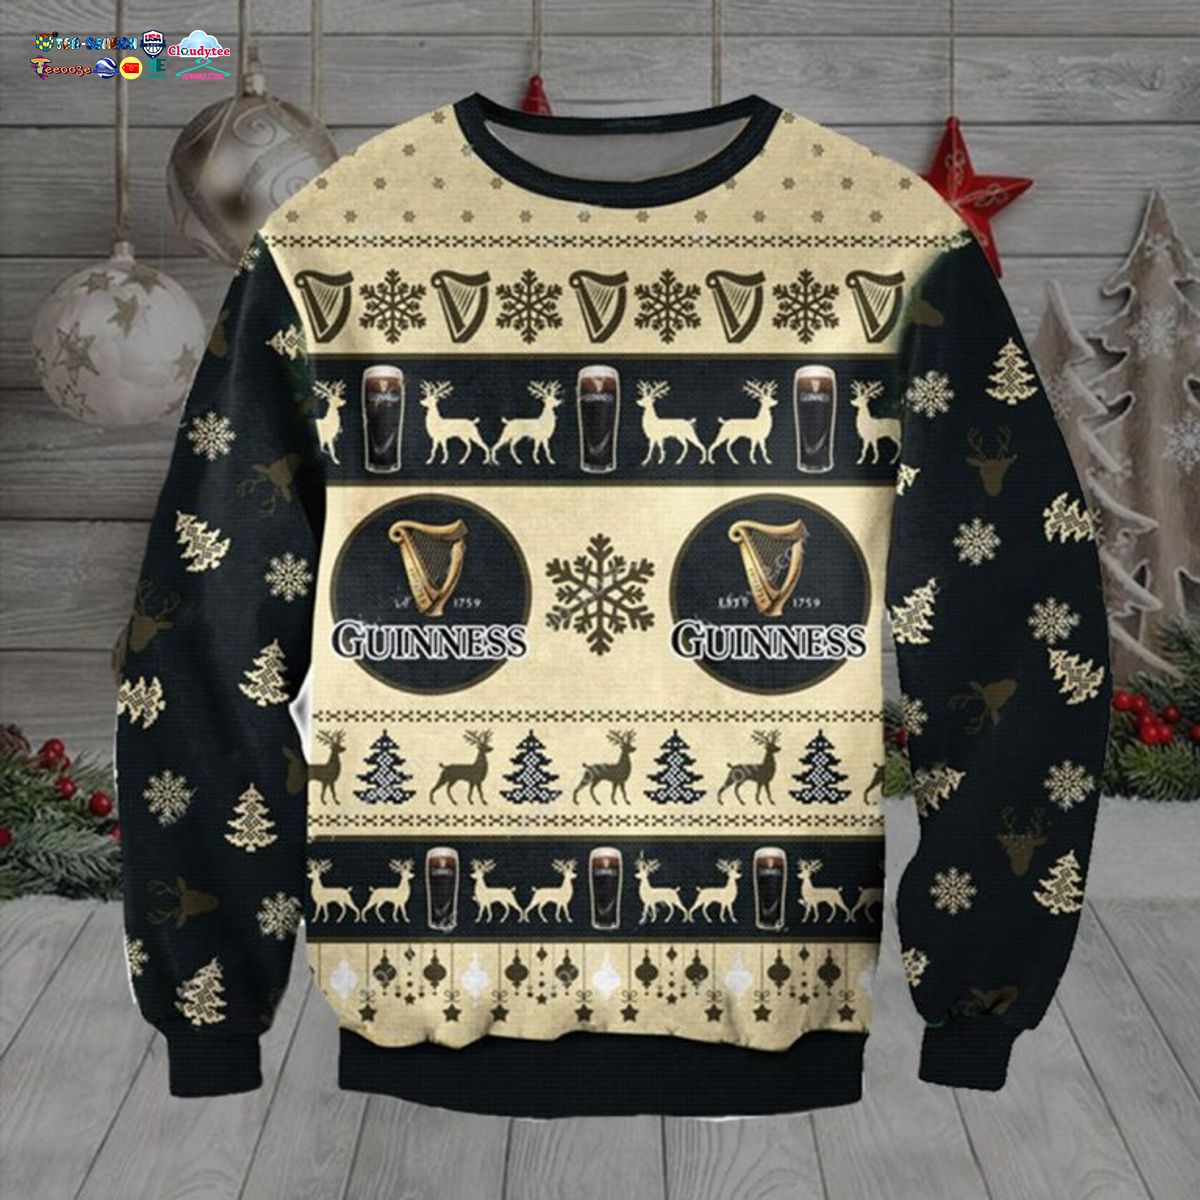 Guinness Ver 2 Ugly Christmas Sweater